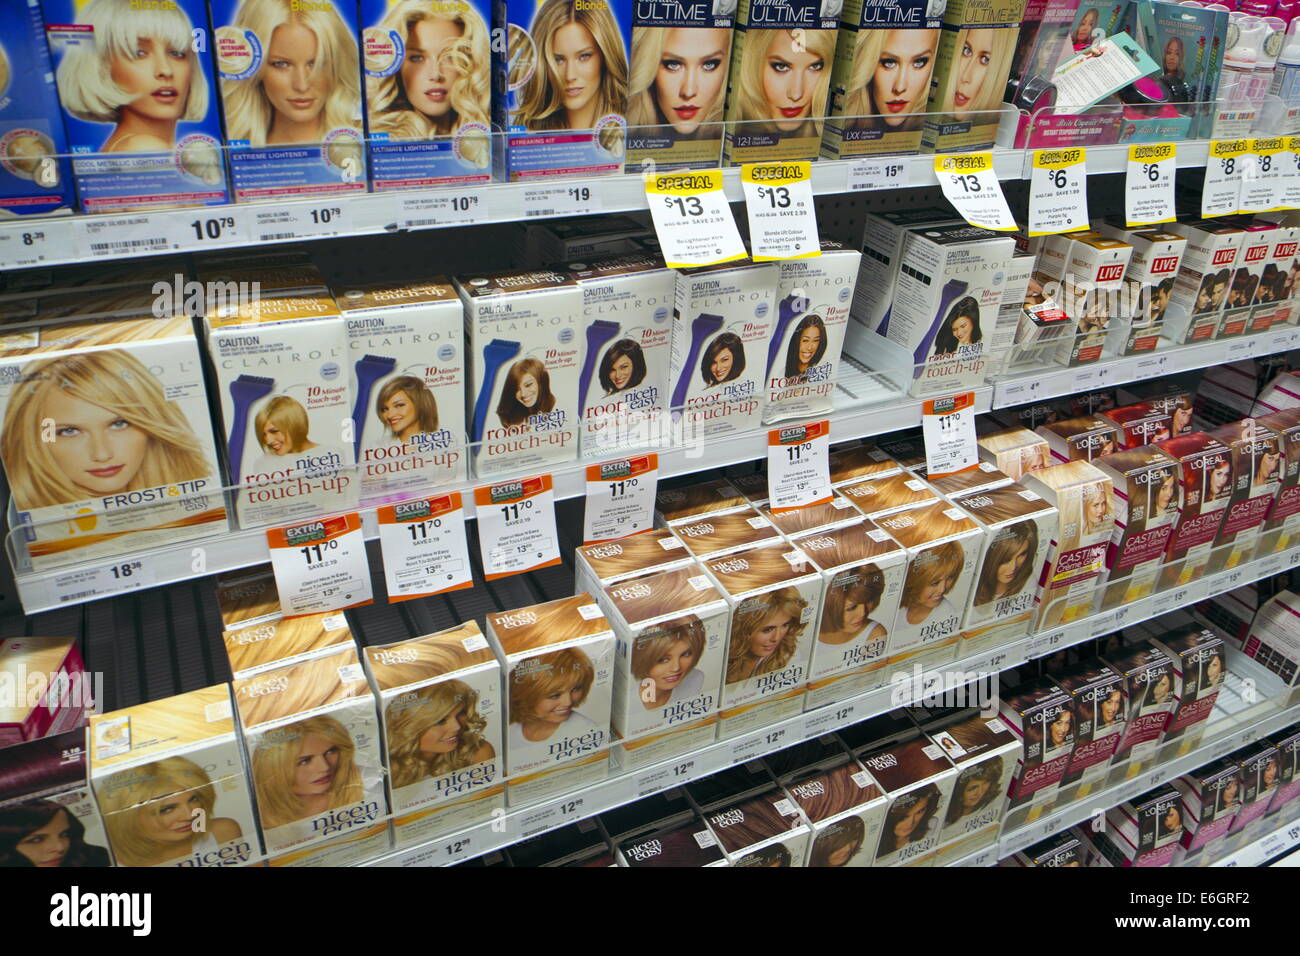 ladies hairdye Woolworths supermarket retail store sydney new south wales australia,woolworths  a major national grocery chain Stock Photo